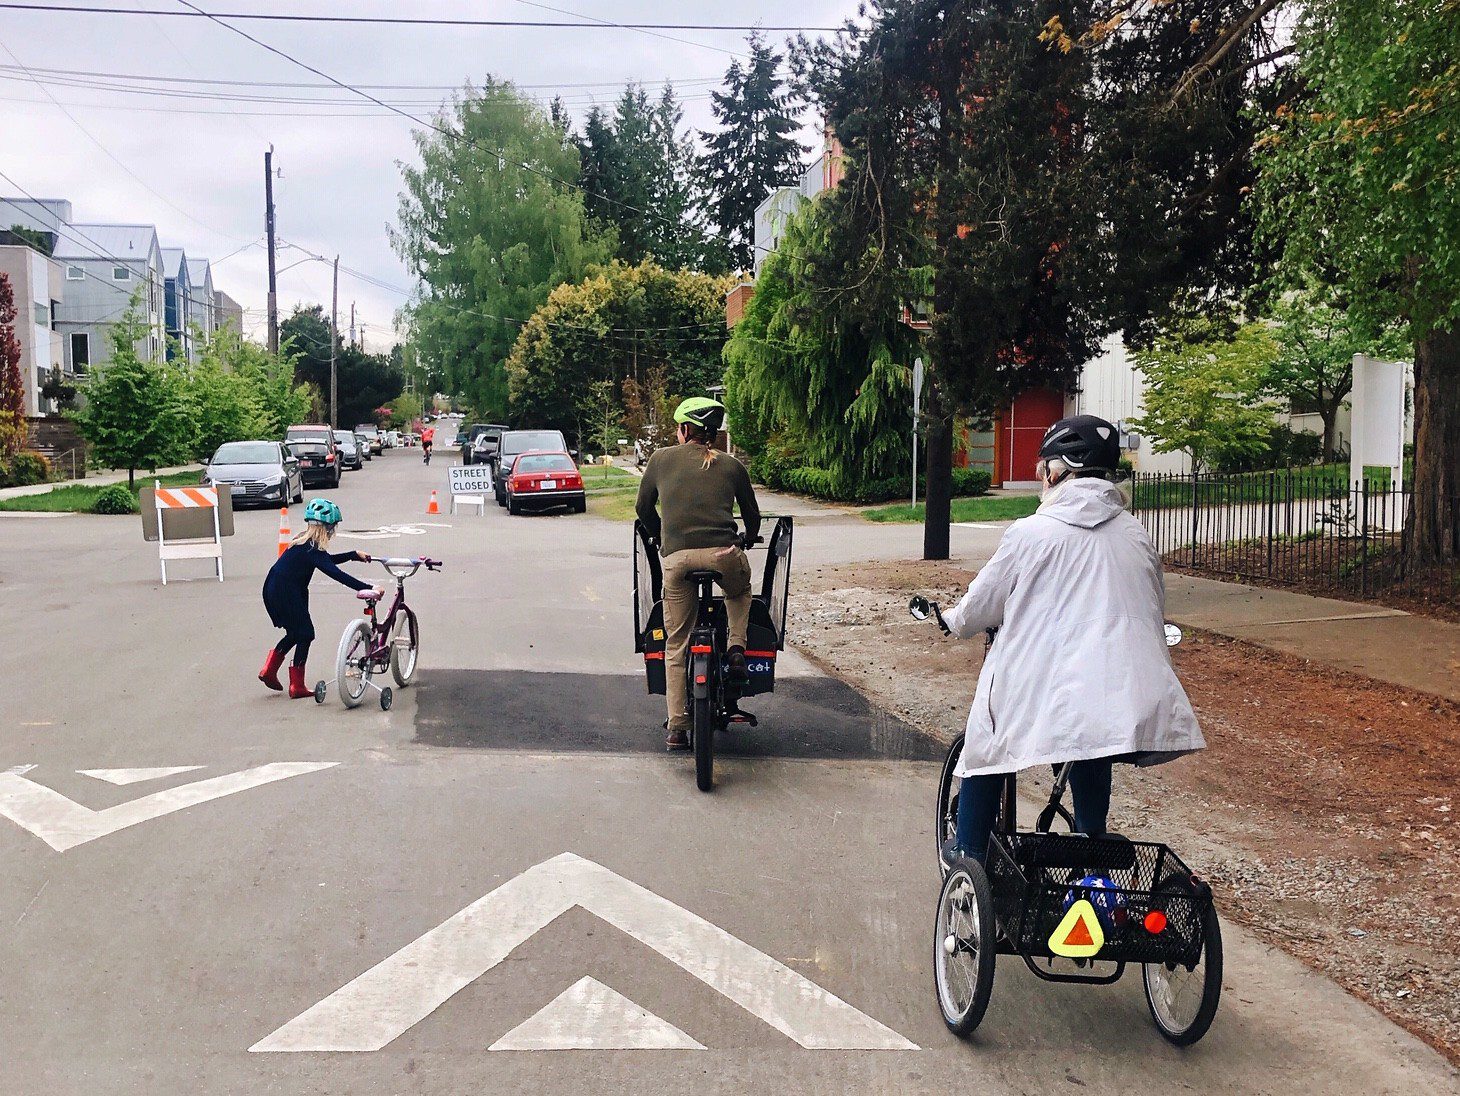 A family riding together on a Stay Healthy Street